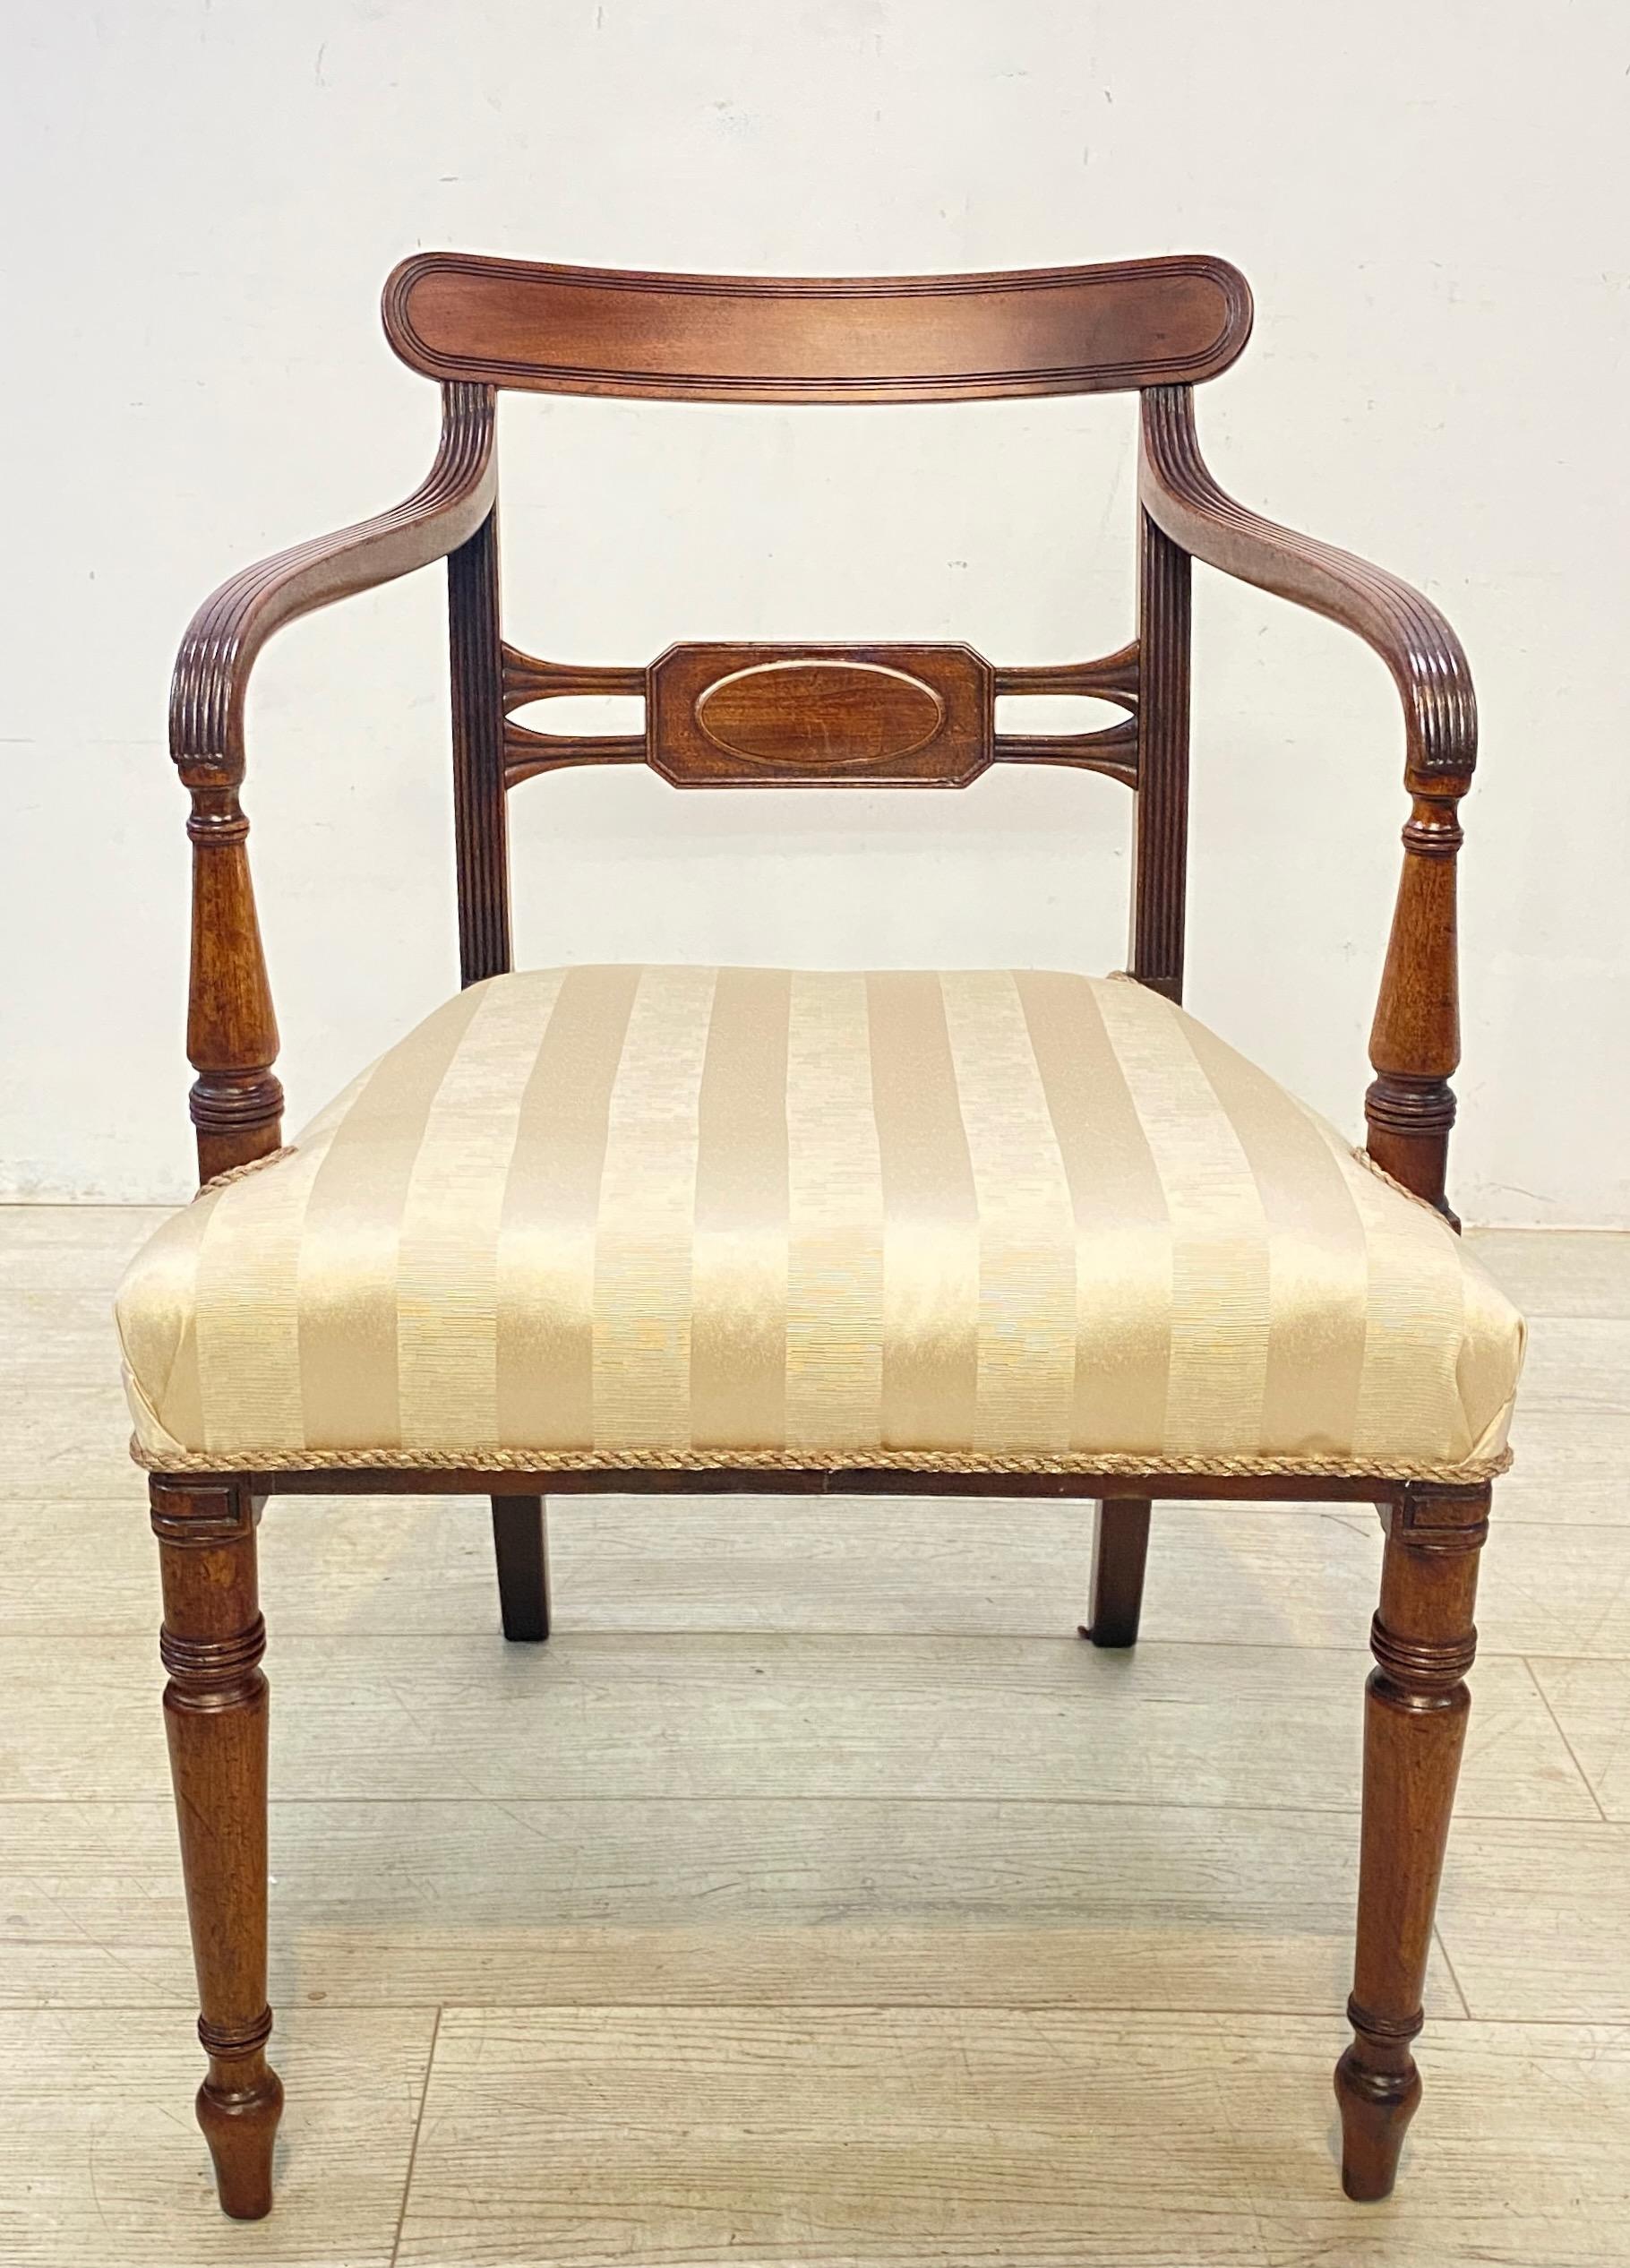 Set of 4 Early 19th Century English Regency Mahogany Dining Chairs, circa 1820 For Sale 1